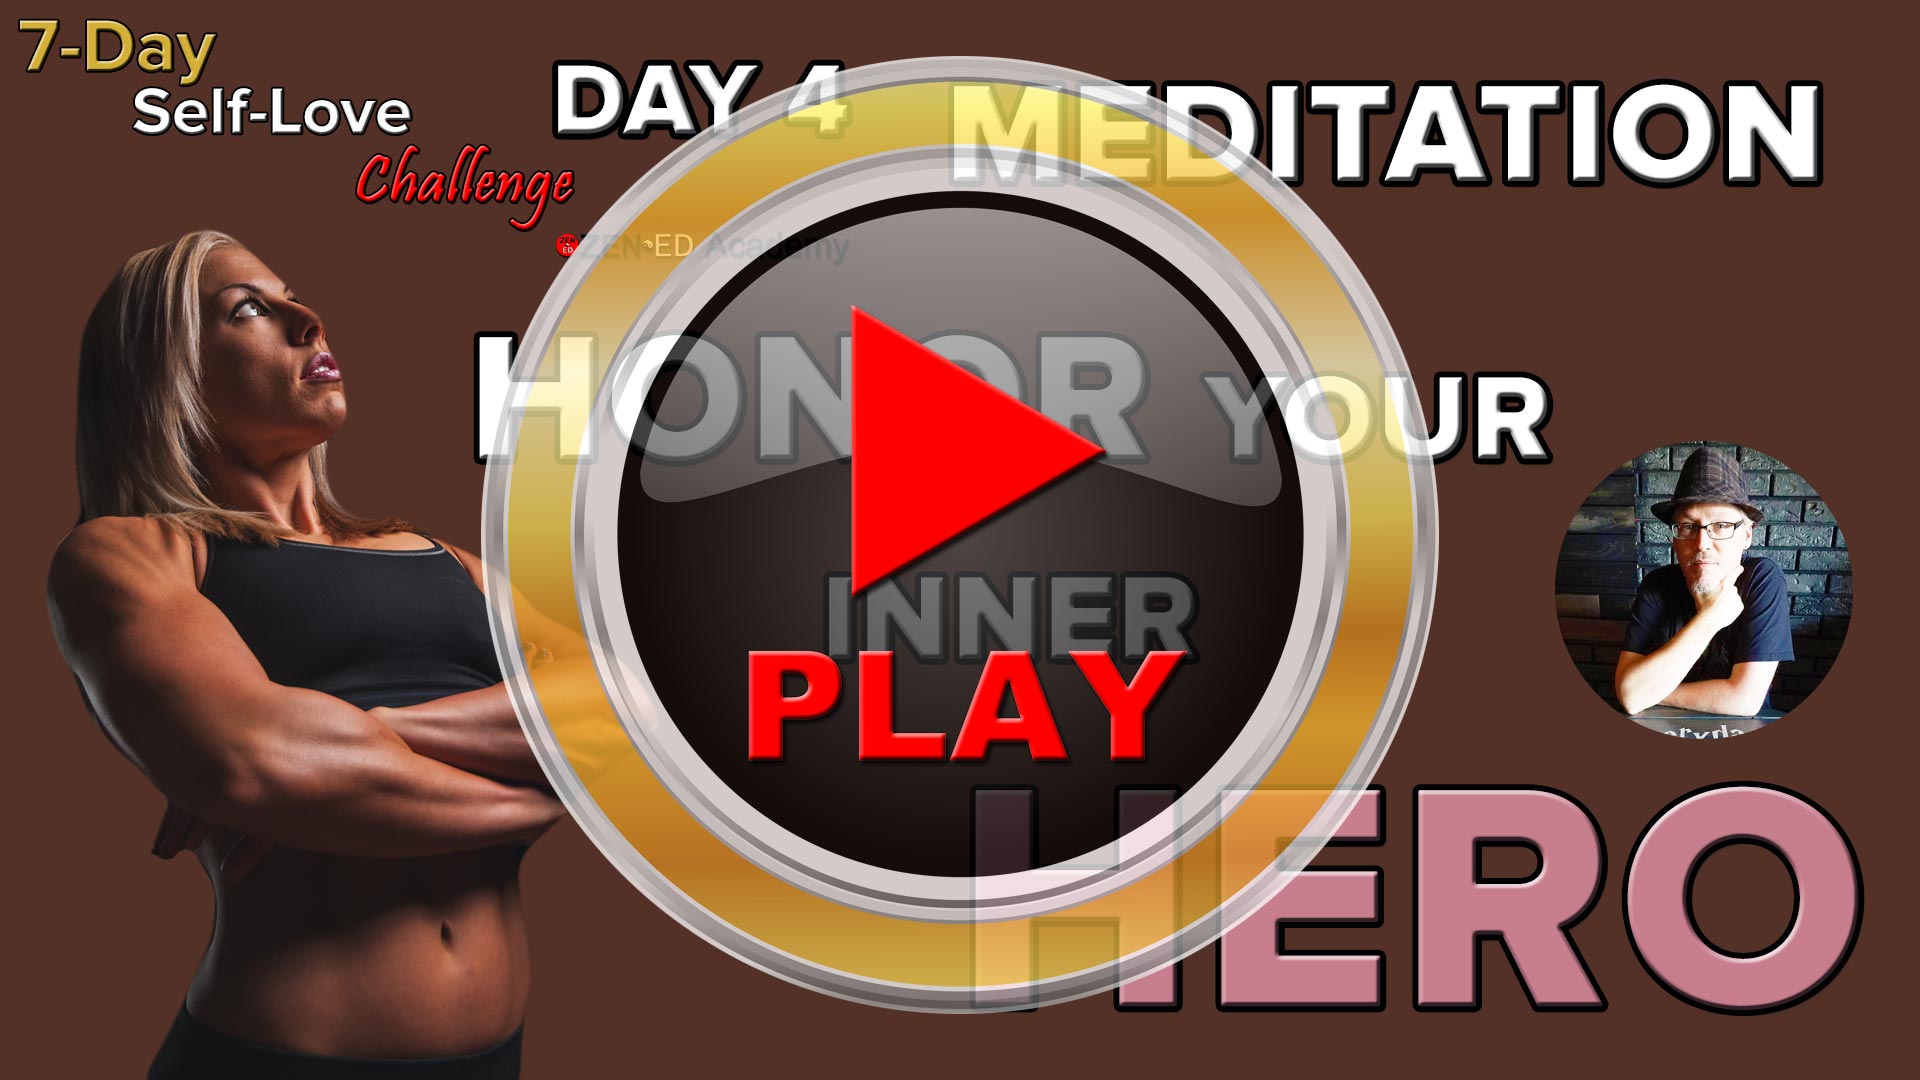 Play Meditation Day 4: Honor Your Inner Hero (Thumbnail) Zen Ed Academy's Free 7-Day Self-Love Challenge